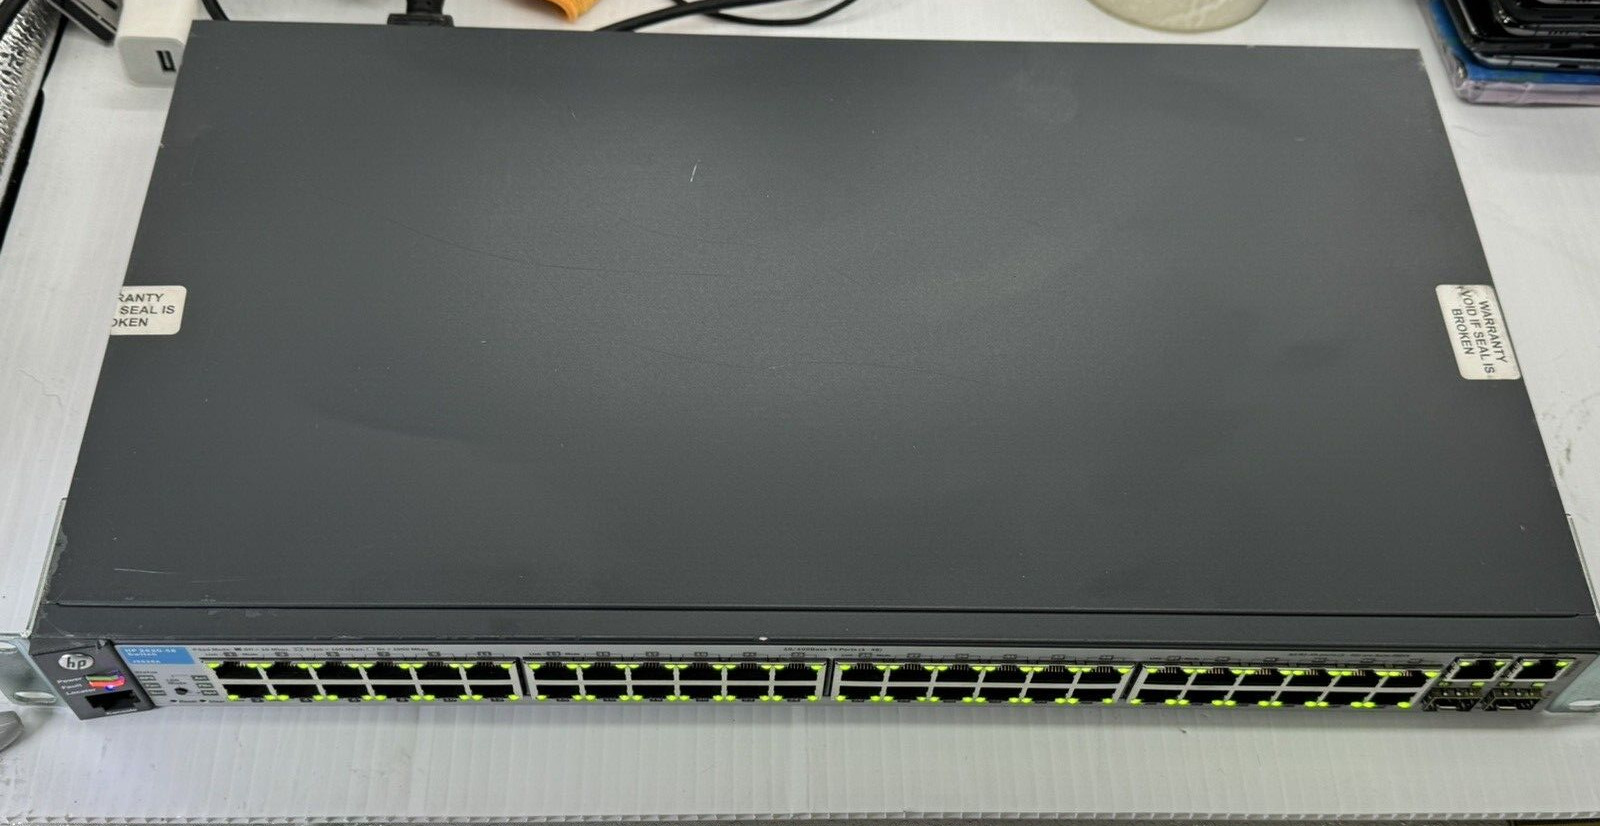 HP 2530-48G 48 Port Gigabit Ethernet Network Switch J9775A /POWER CABLE